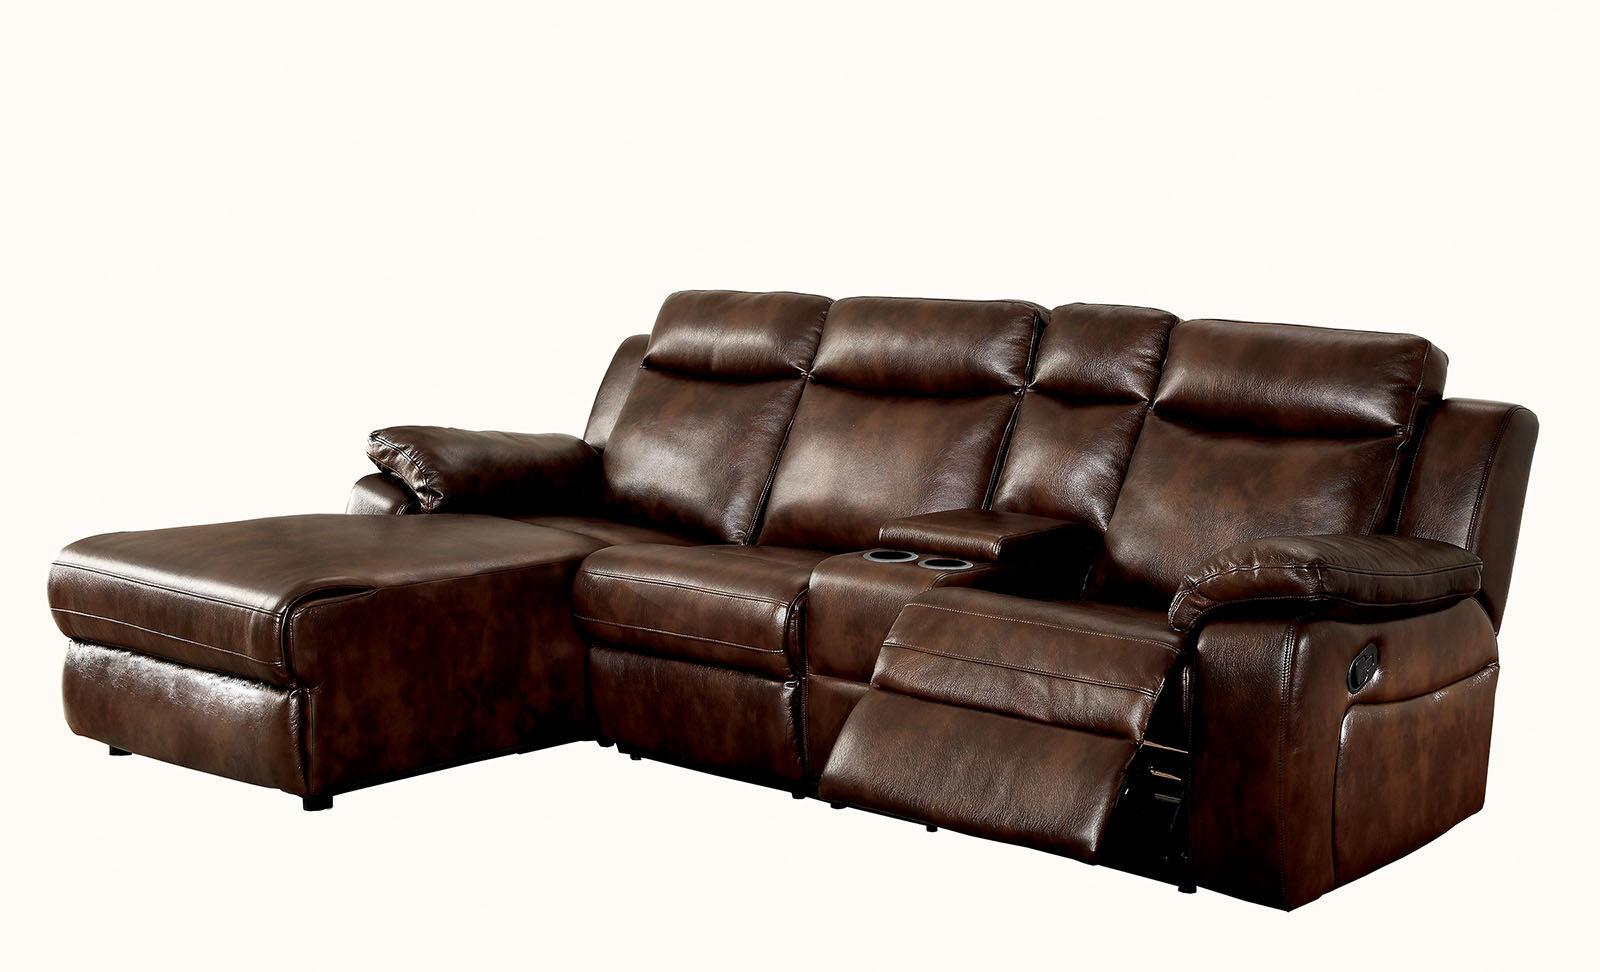 Transitional Recliner Sectional HARDY CM6781BR CM6781BR in Brown Leatherette